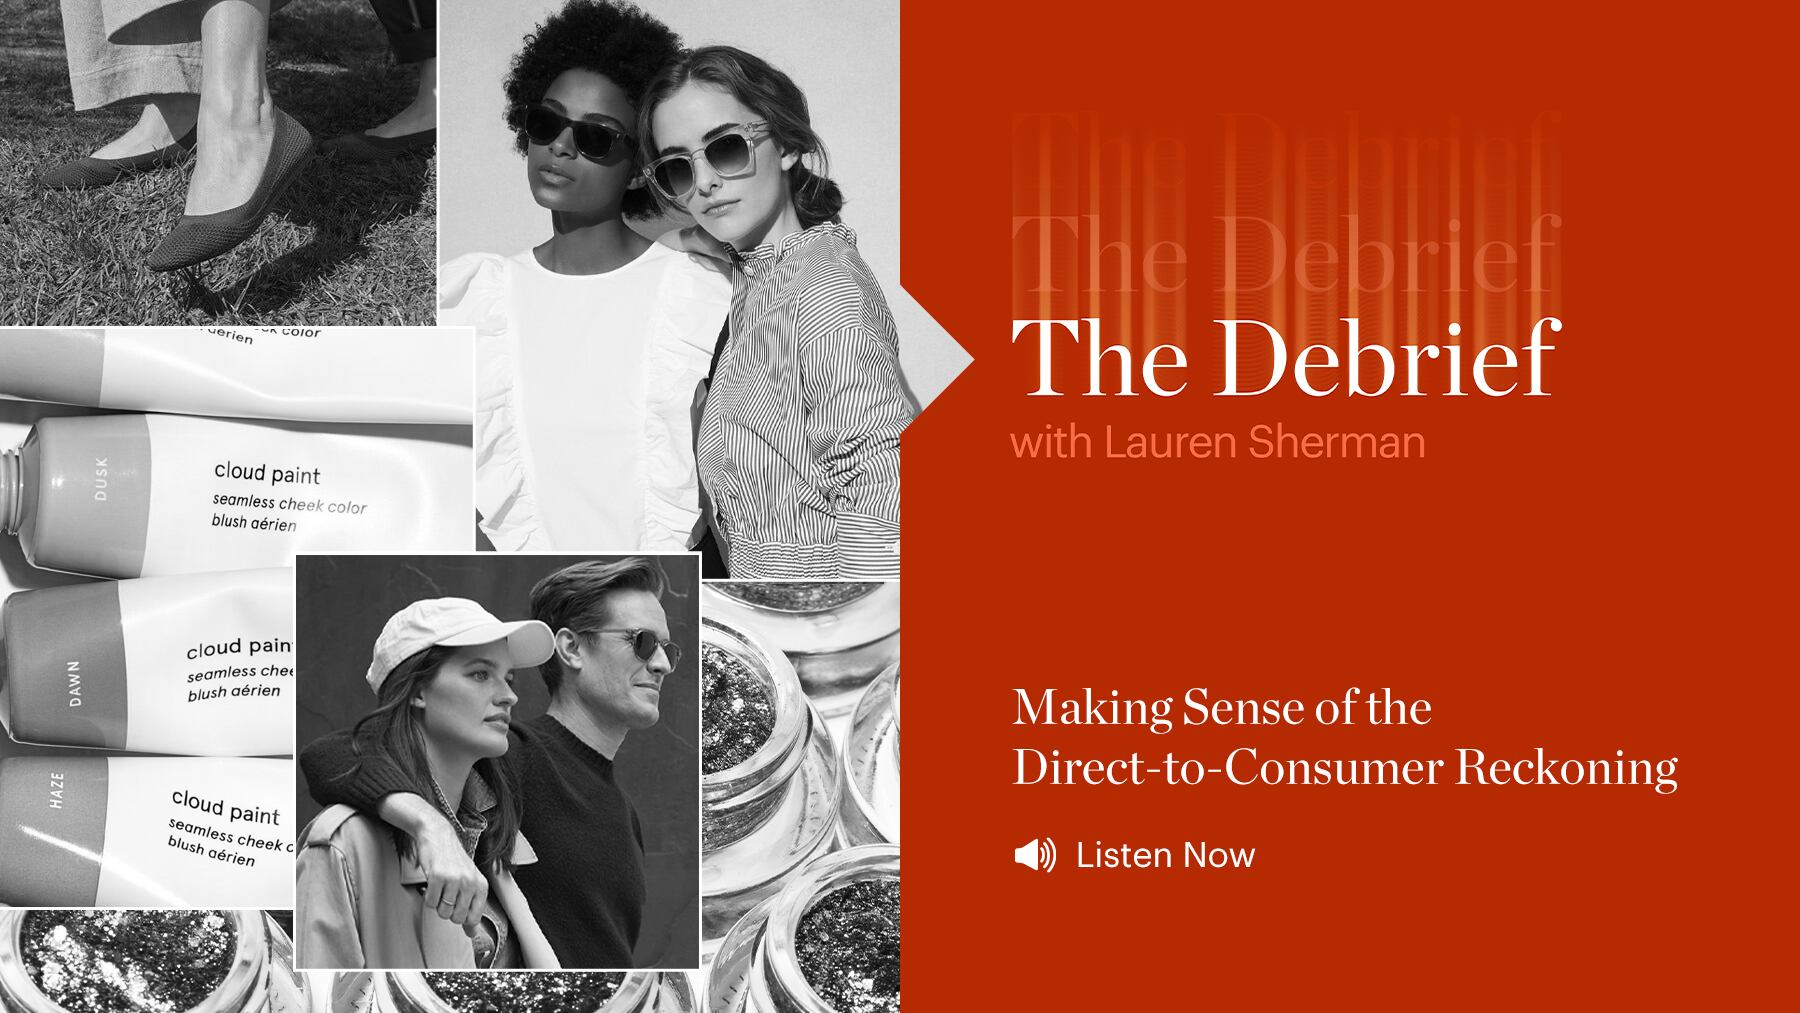 Making Sense of the Direct-to-Consumer Reckoning